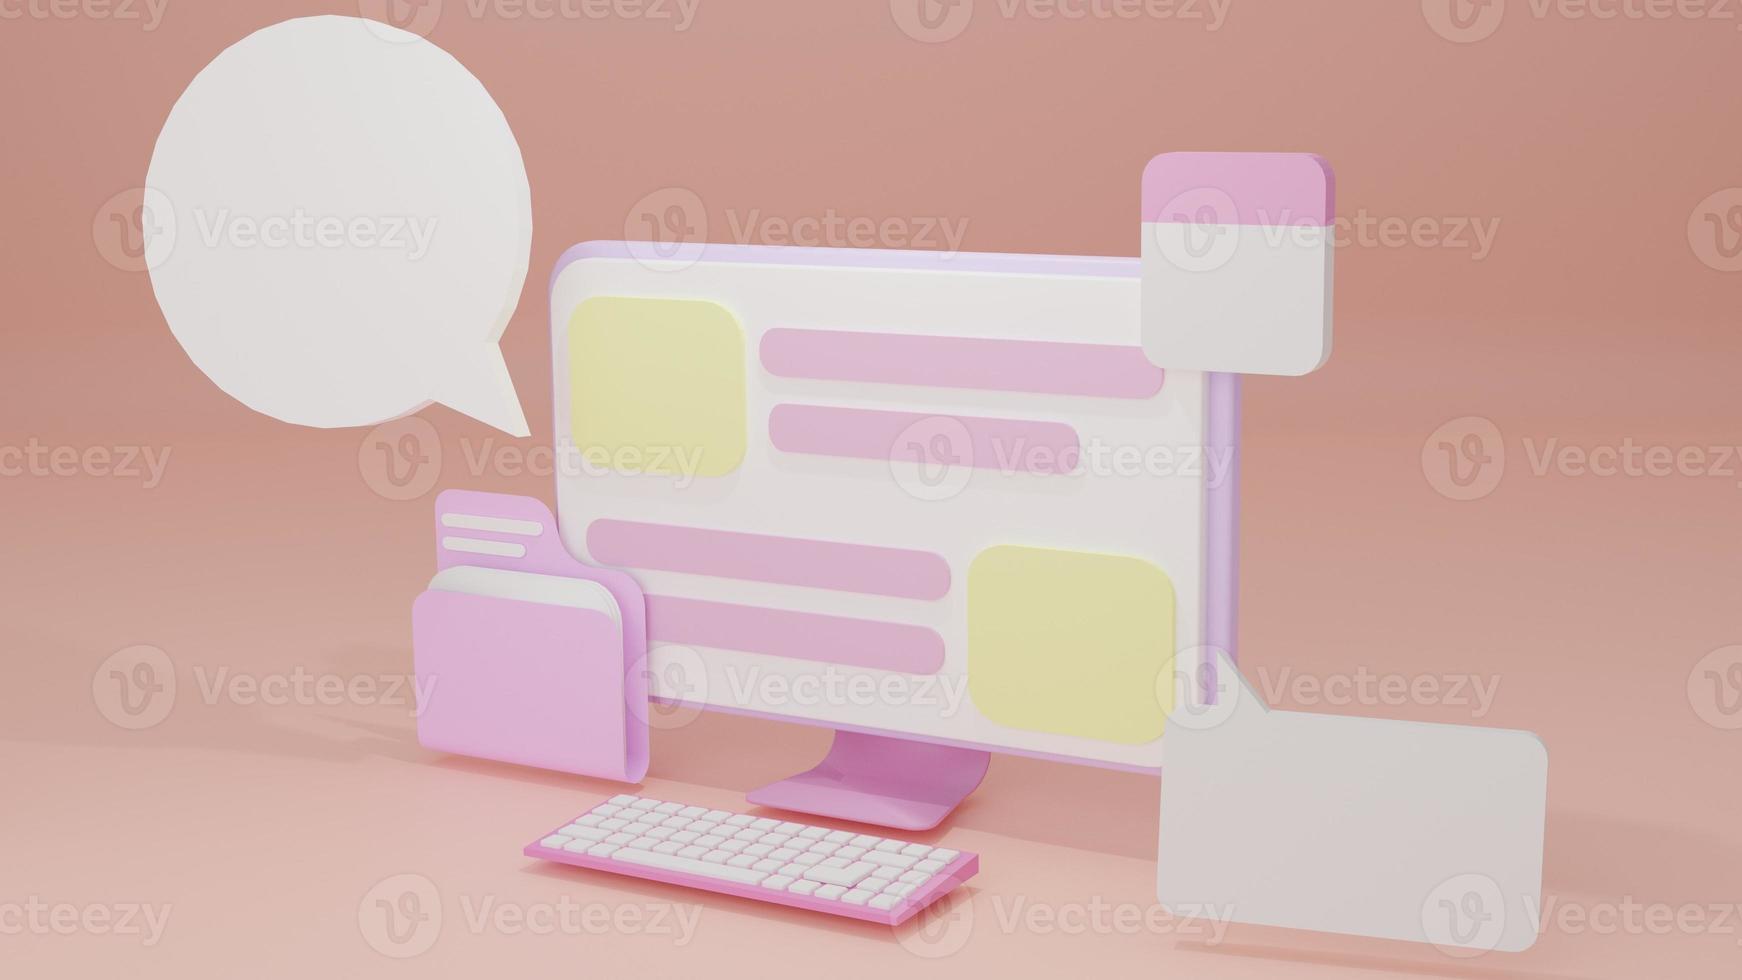 3D vector social media on computer with photo in bubbles platform, online social for text in speech bubbles concept, chat speech, chatting message with isolate background.3d render illustration.